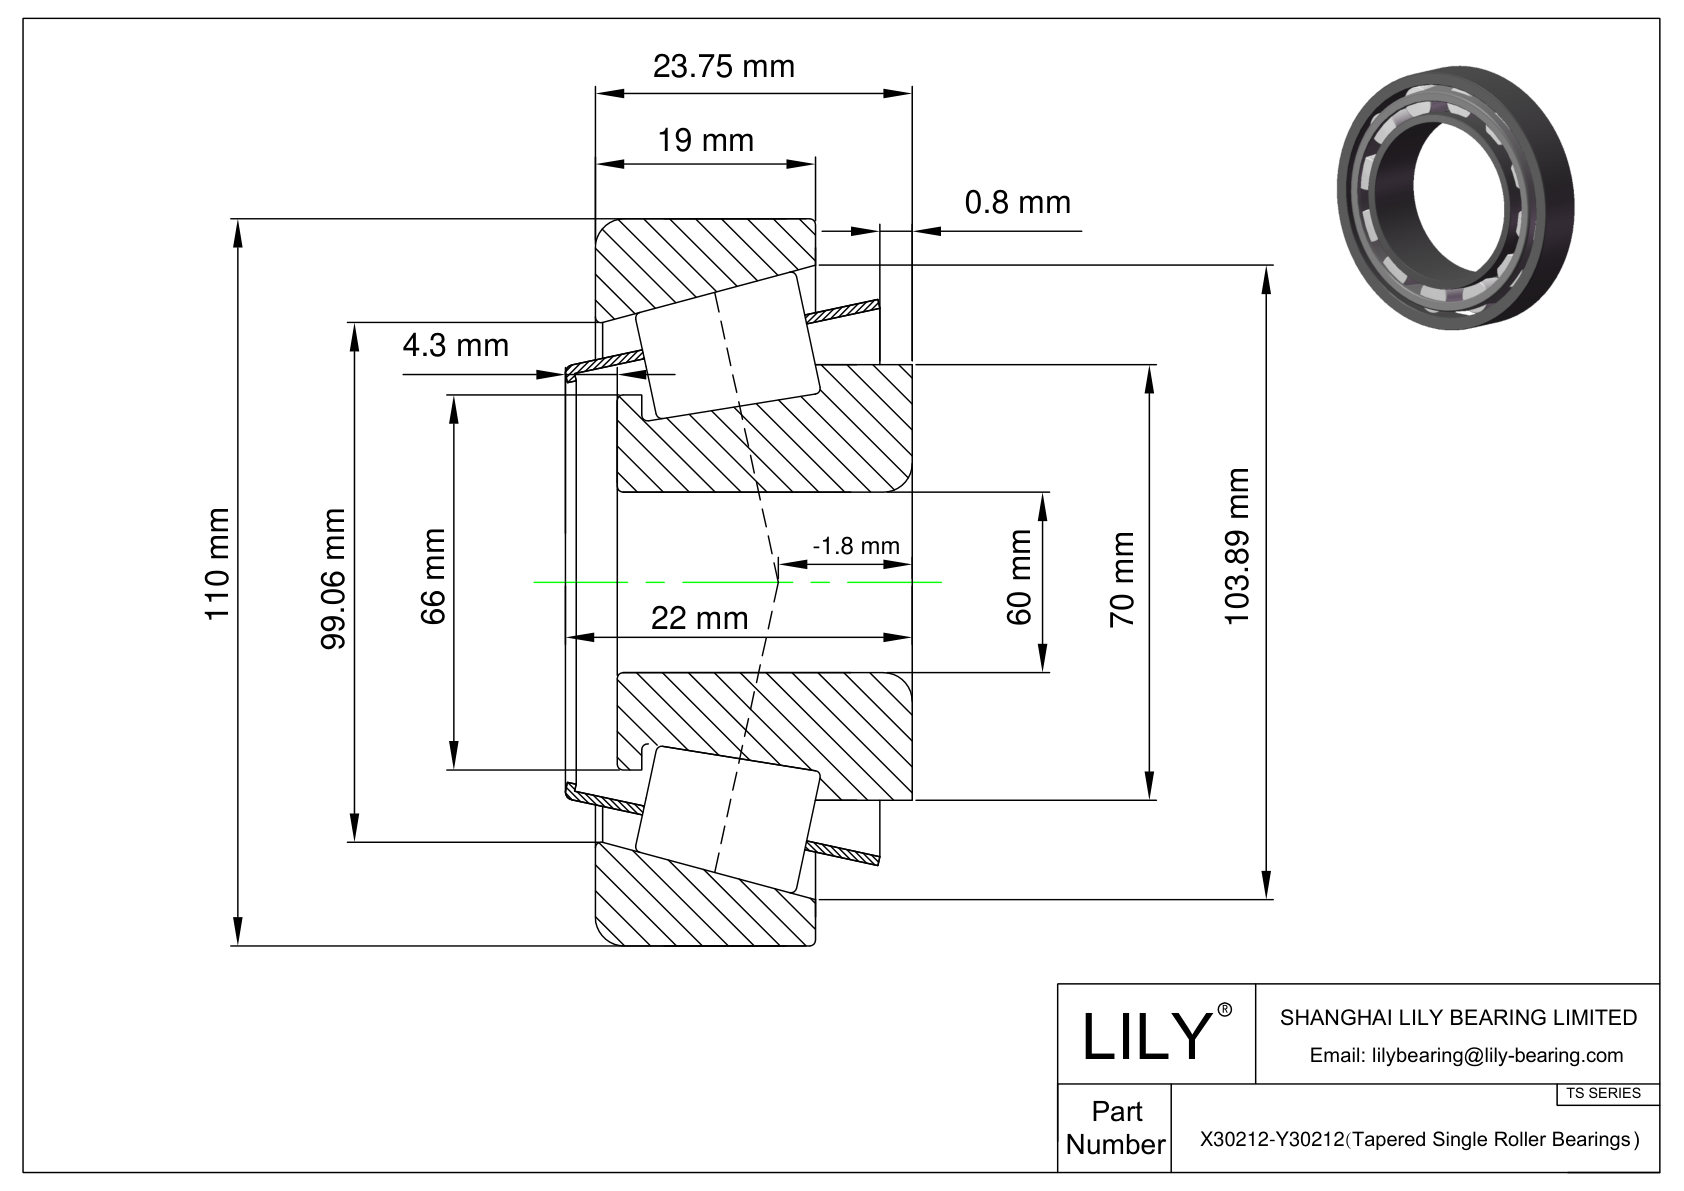 X30212-Y30212 TS (Tapered Single Roller Bearings) (Metric) cad drawing